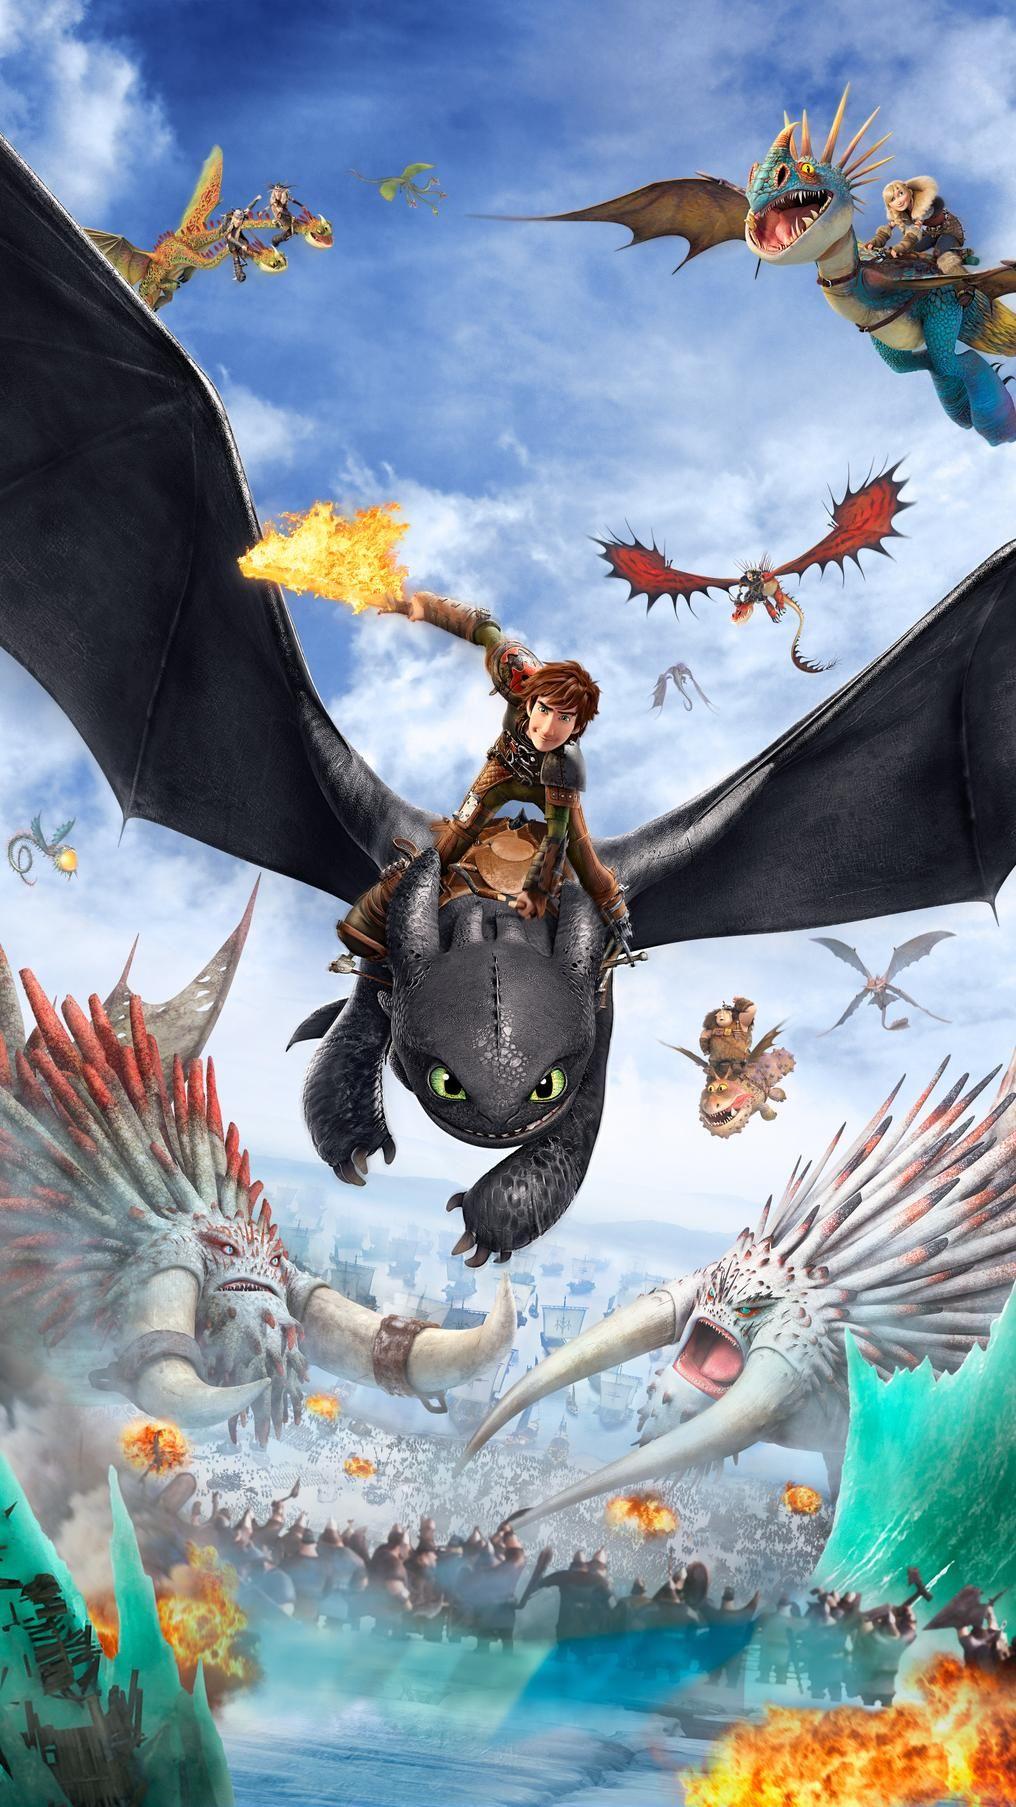 How to Train Your Dragon 2 (2014) Phone Wallpaper. How to train